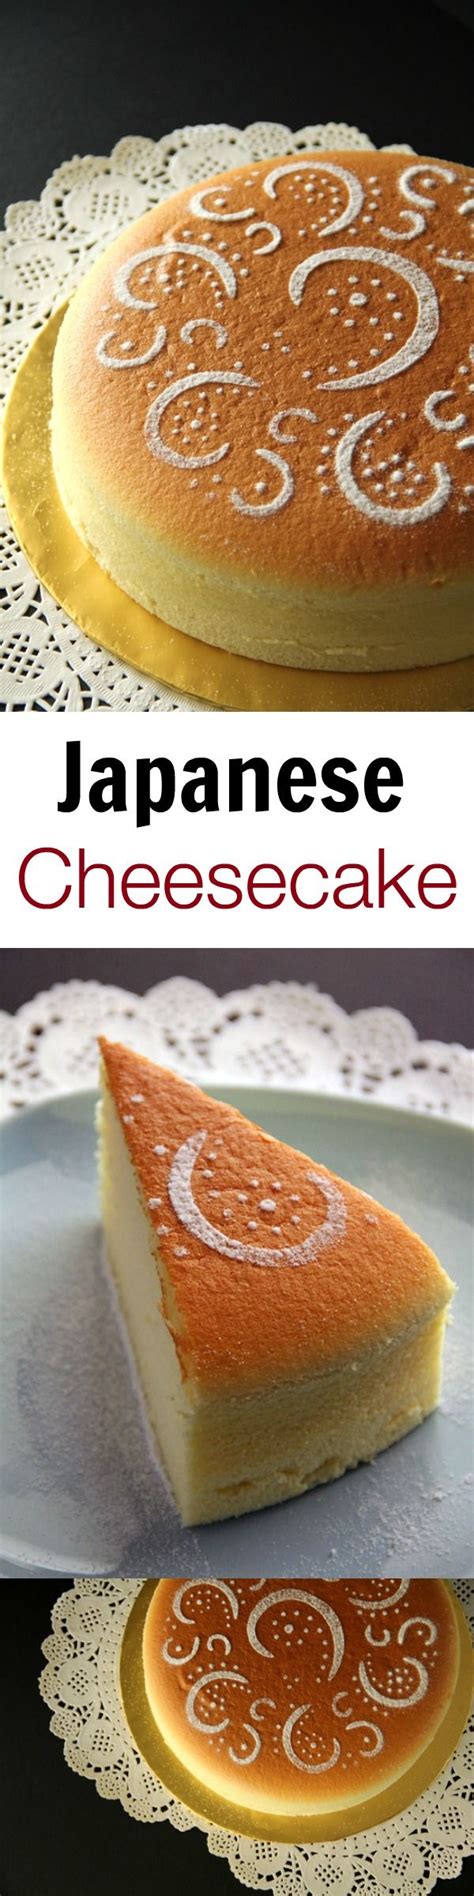 Japanese Cheesecake Easy Delicious Recipes